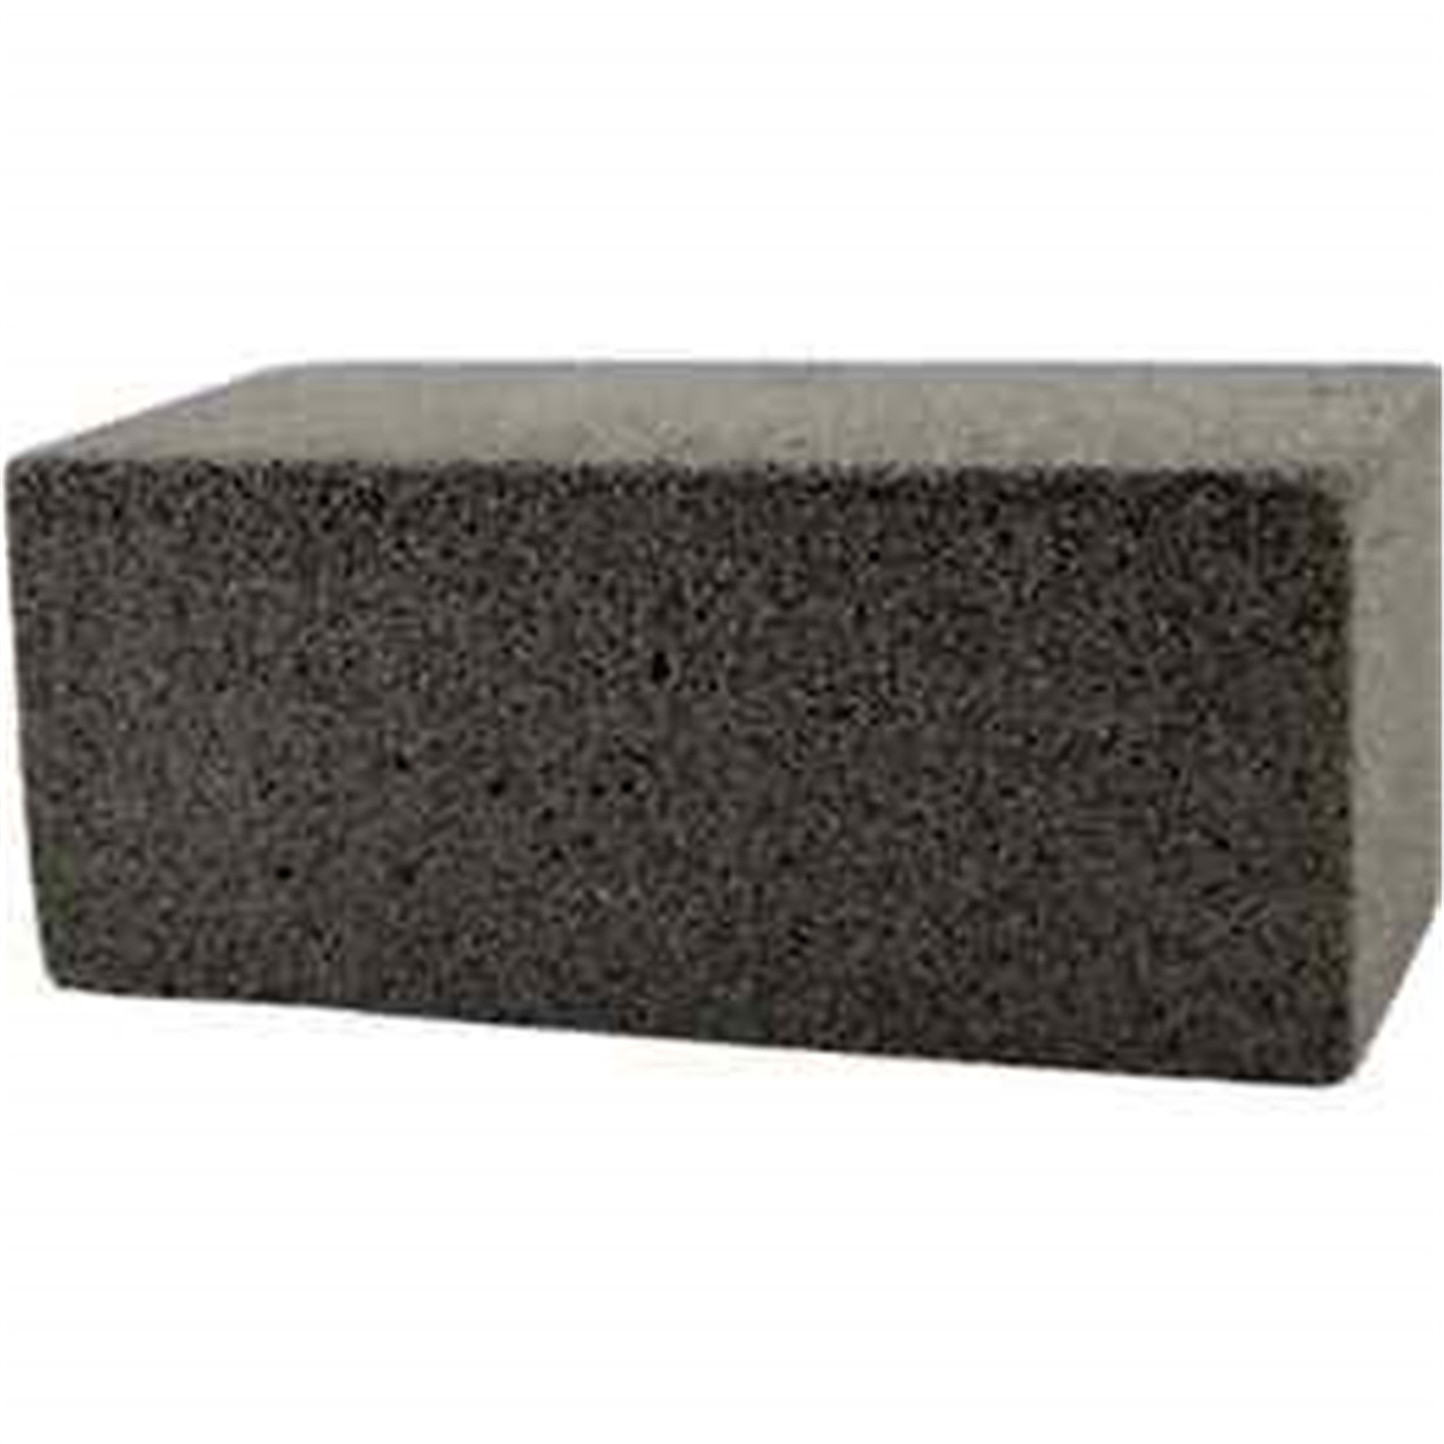 Wholesale #2021 BBQ griddle block pumice stone for cleaning from china suppliers